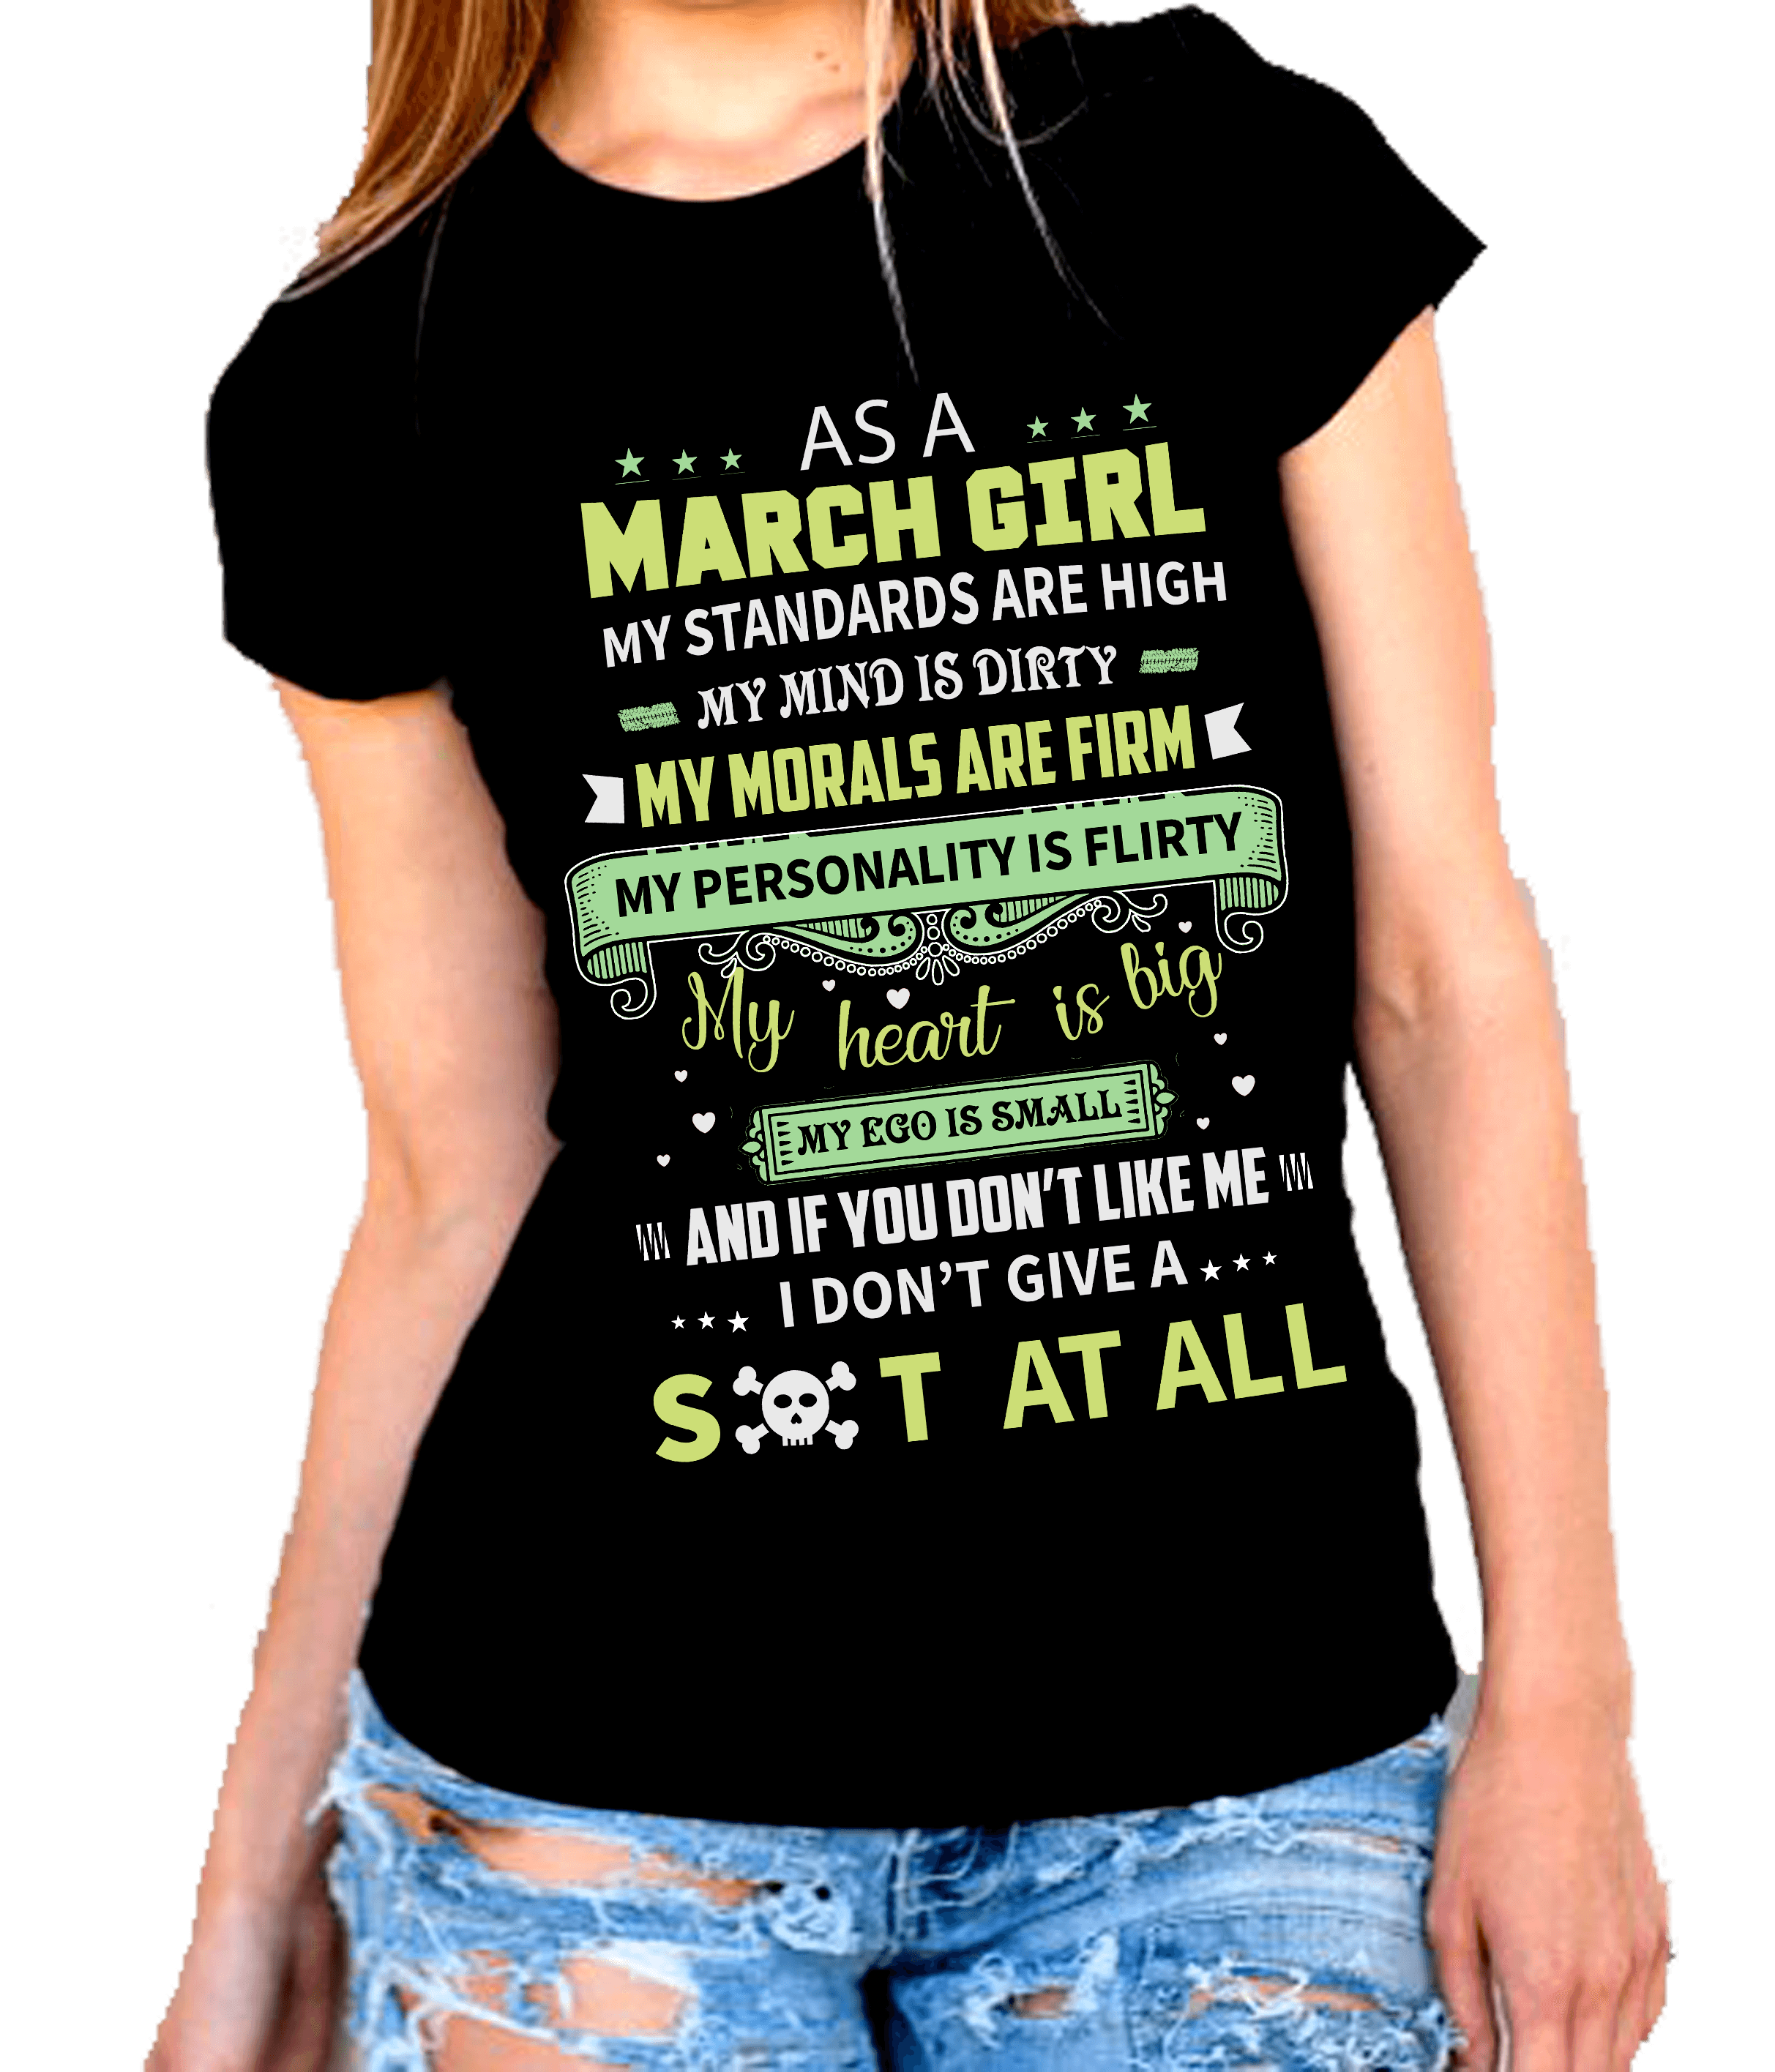 "March Pack Of 4 Shirts"